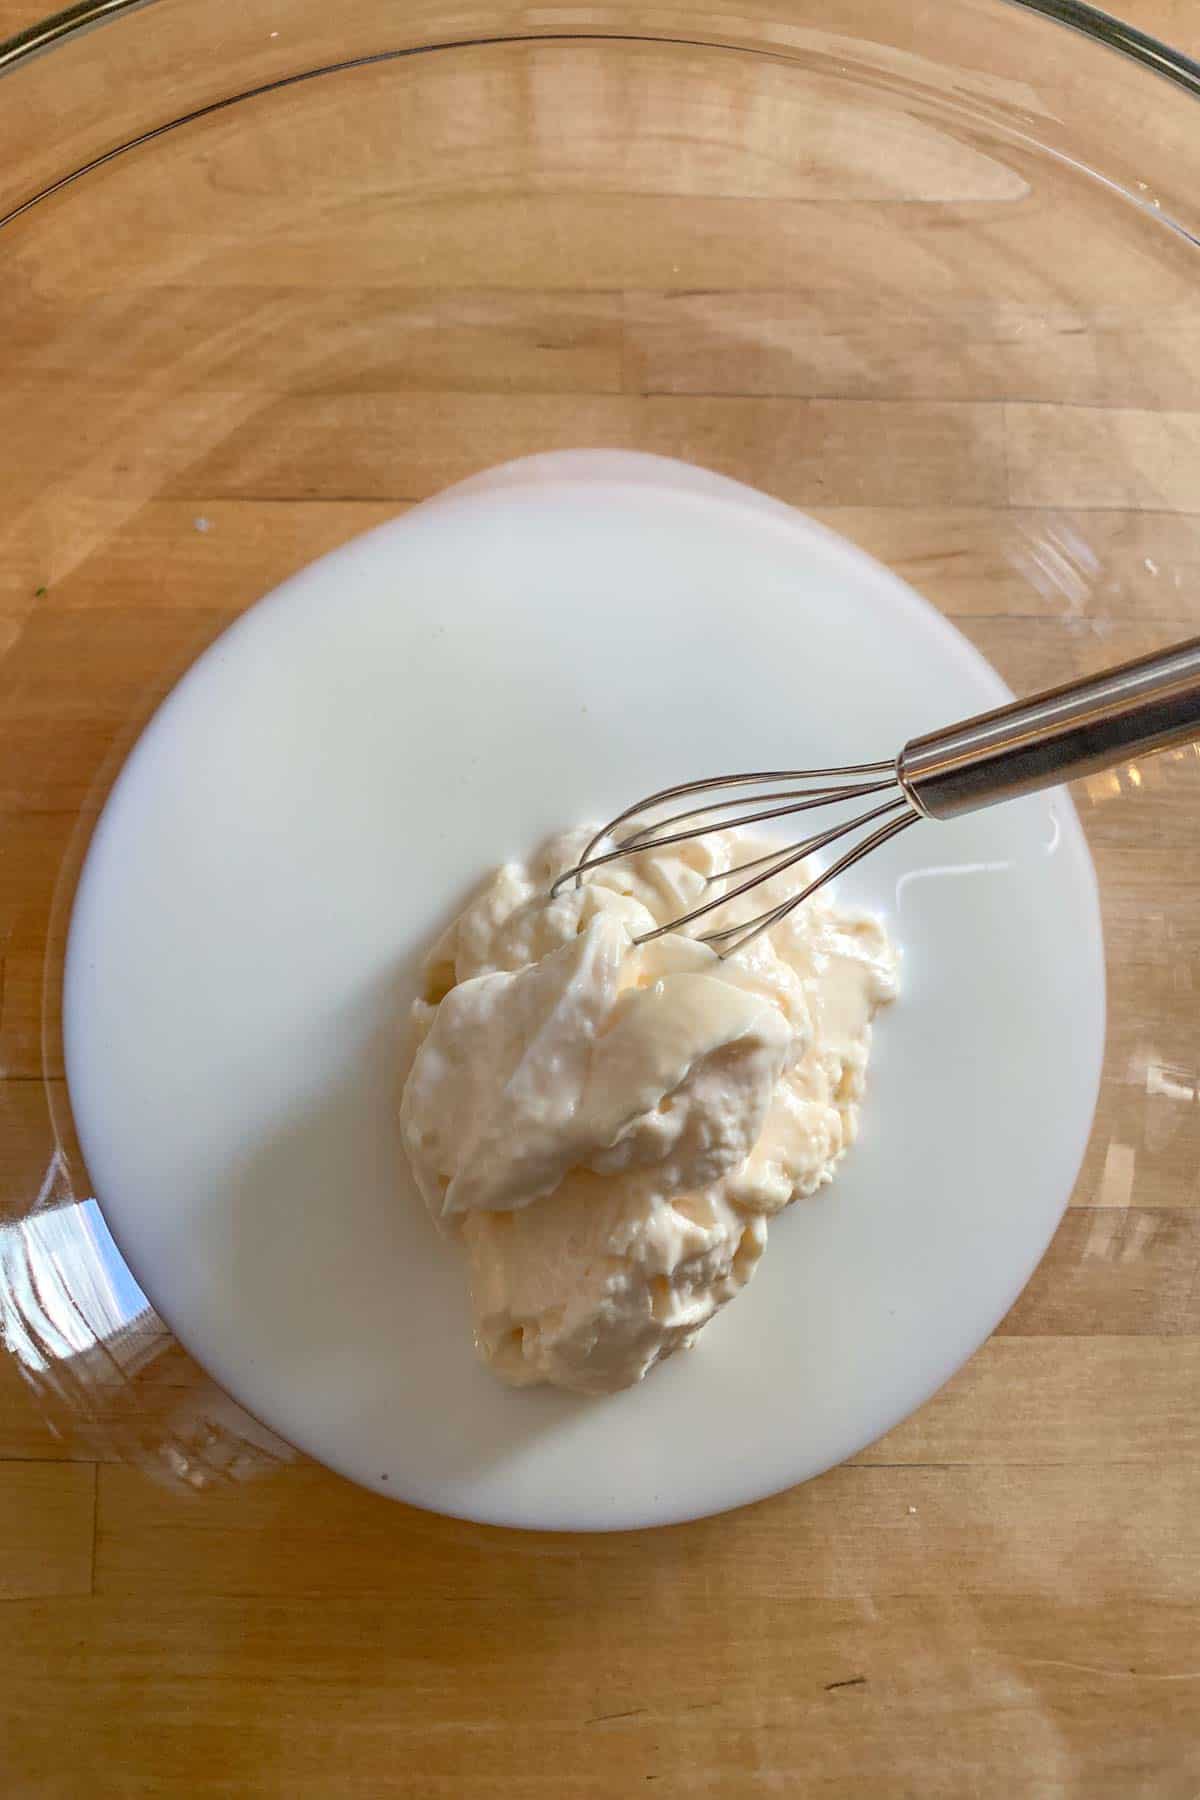 Buttermilk and mayonnaise in a glass bowl on a wooden countertop.